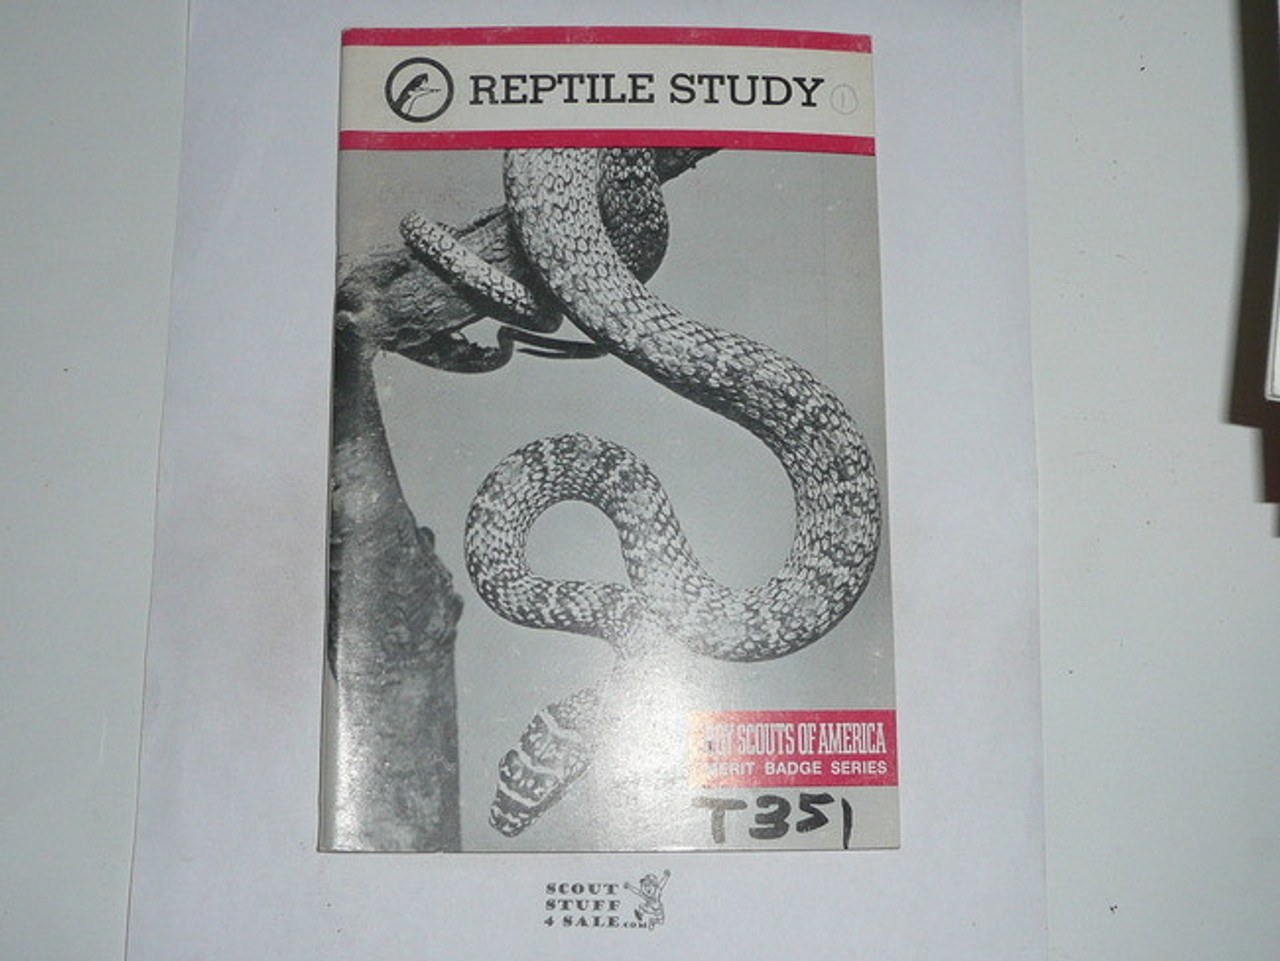 Reptile Study Merit Badge Pamphlet, Type 9, Red Band Cover, 4-86 Printing